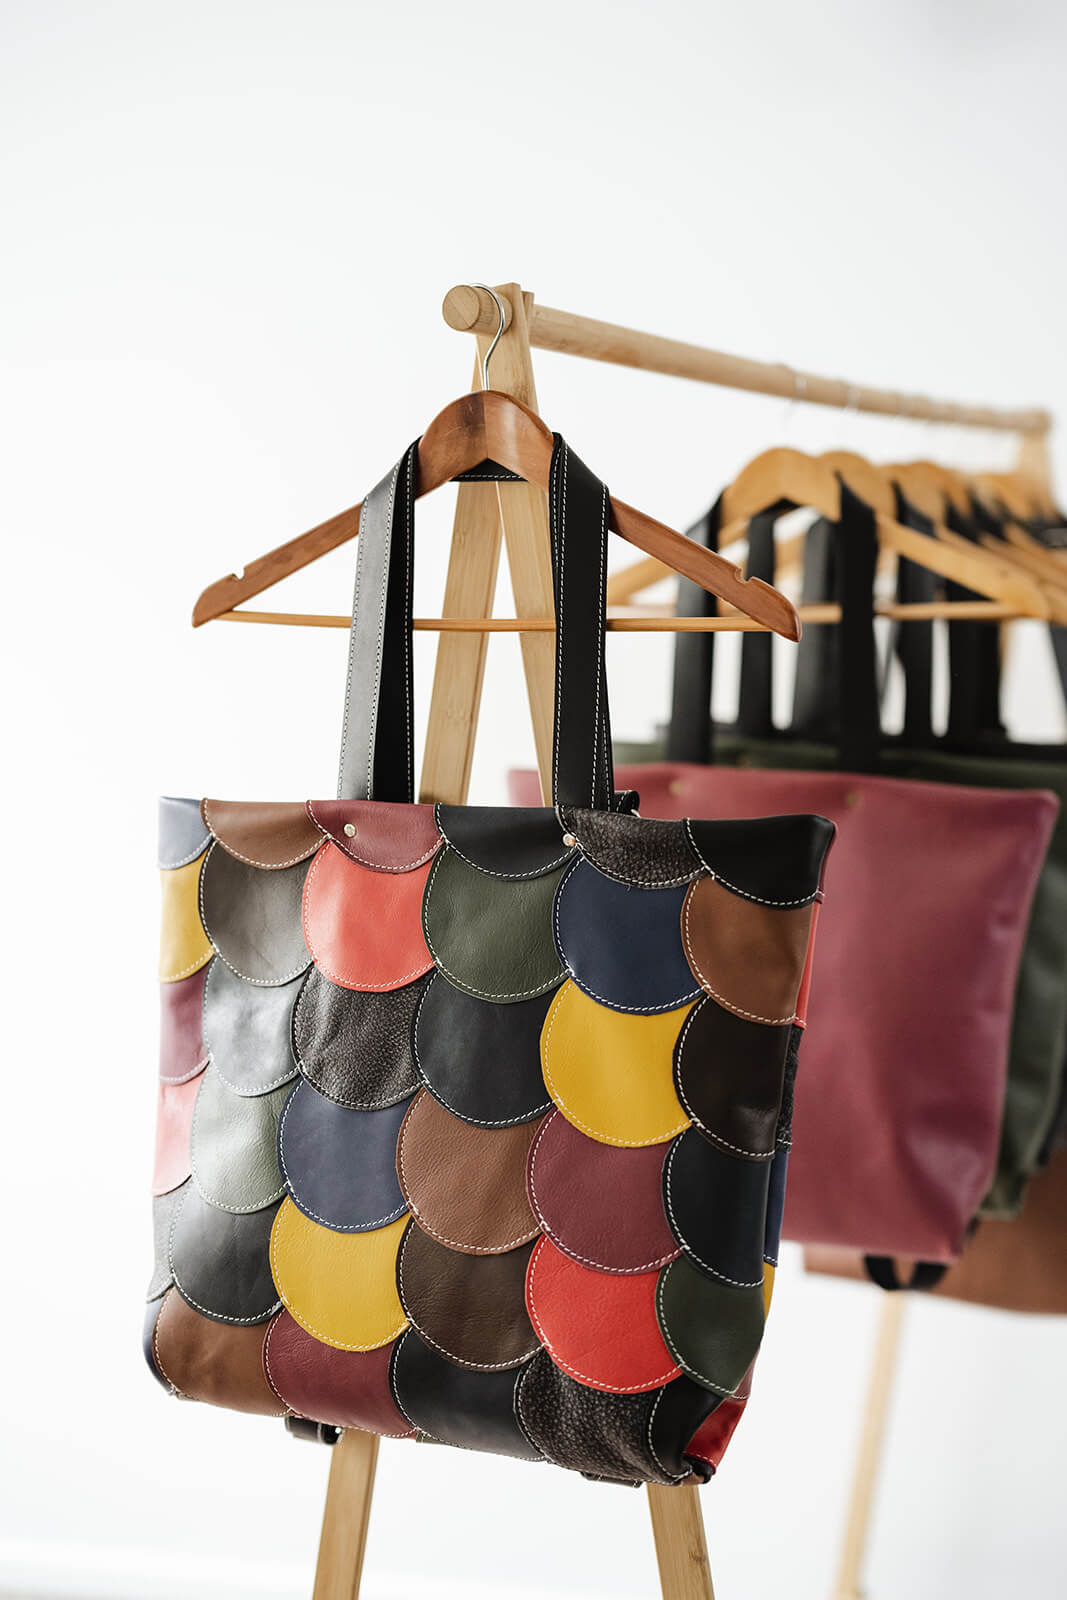 Timber rack with timber coat hangers and white background. A bag is hanging on the front. It is a tote bag made of multiple round leather circles stitched together. The circles are all different colours